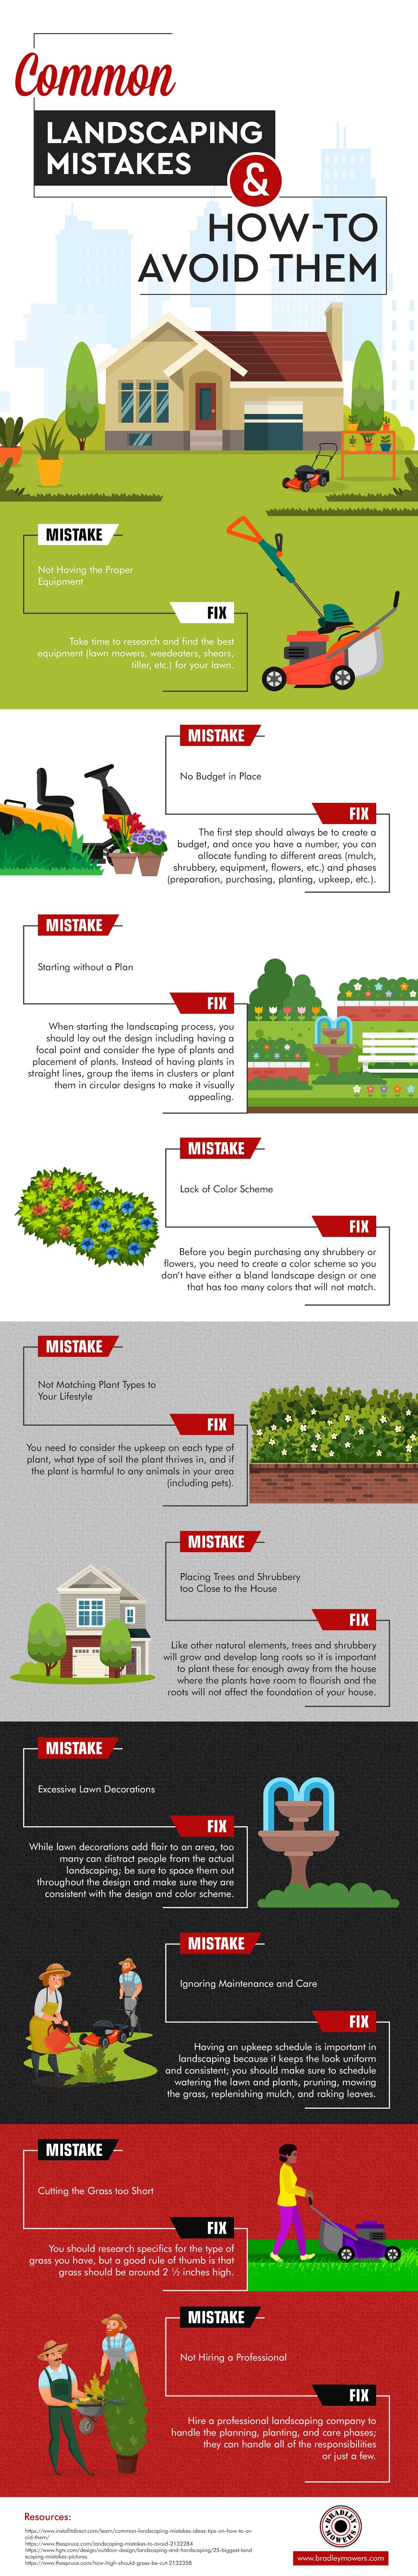 Common Landscaping Mistakes and How To Avoid Them #infographic